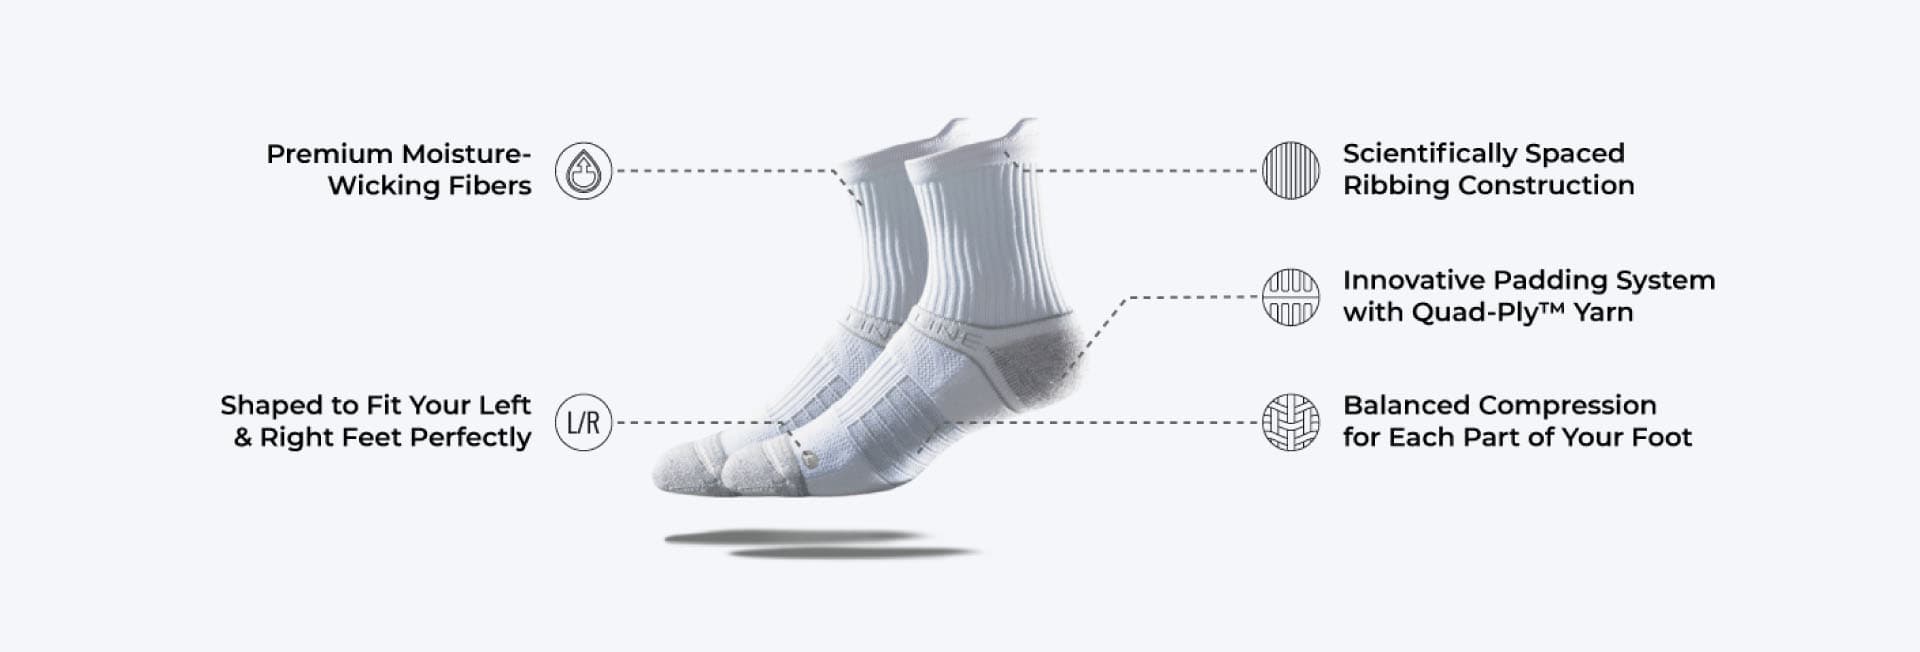 Moisture Wicking Fibers, Left and Right Feet Fit, Scientifically Spaced Ribbing Construction, Innovative Padding System with Quad-Ply Yarn,  Balanced Compression for Each Part of You Foot